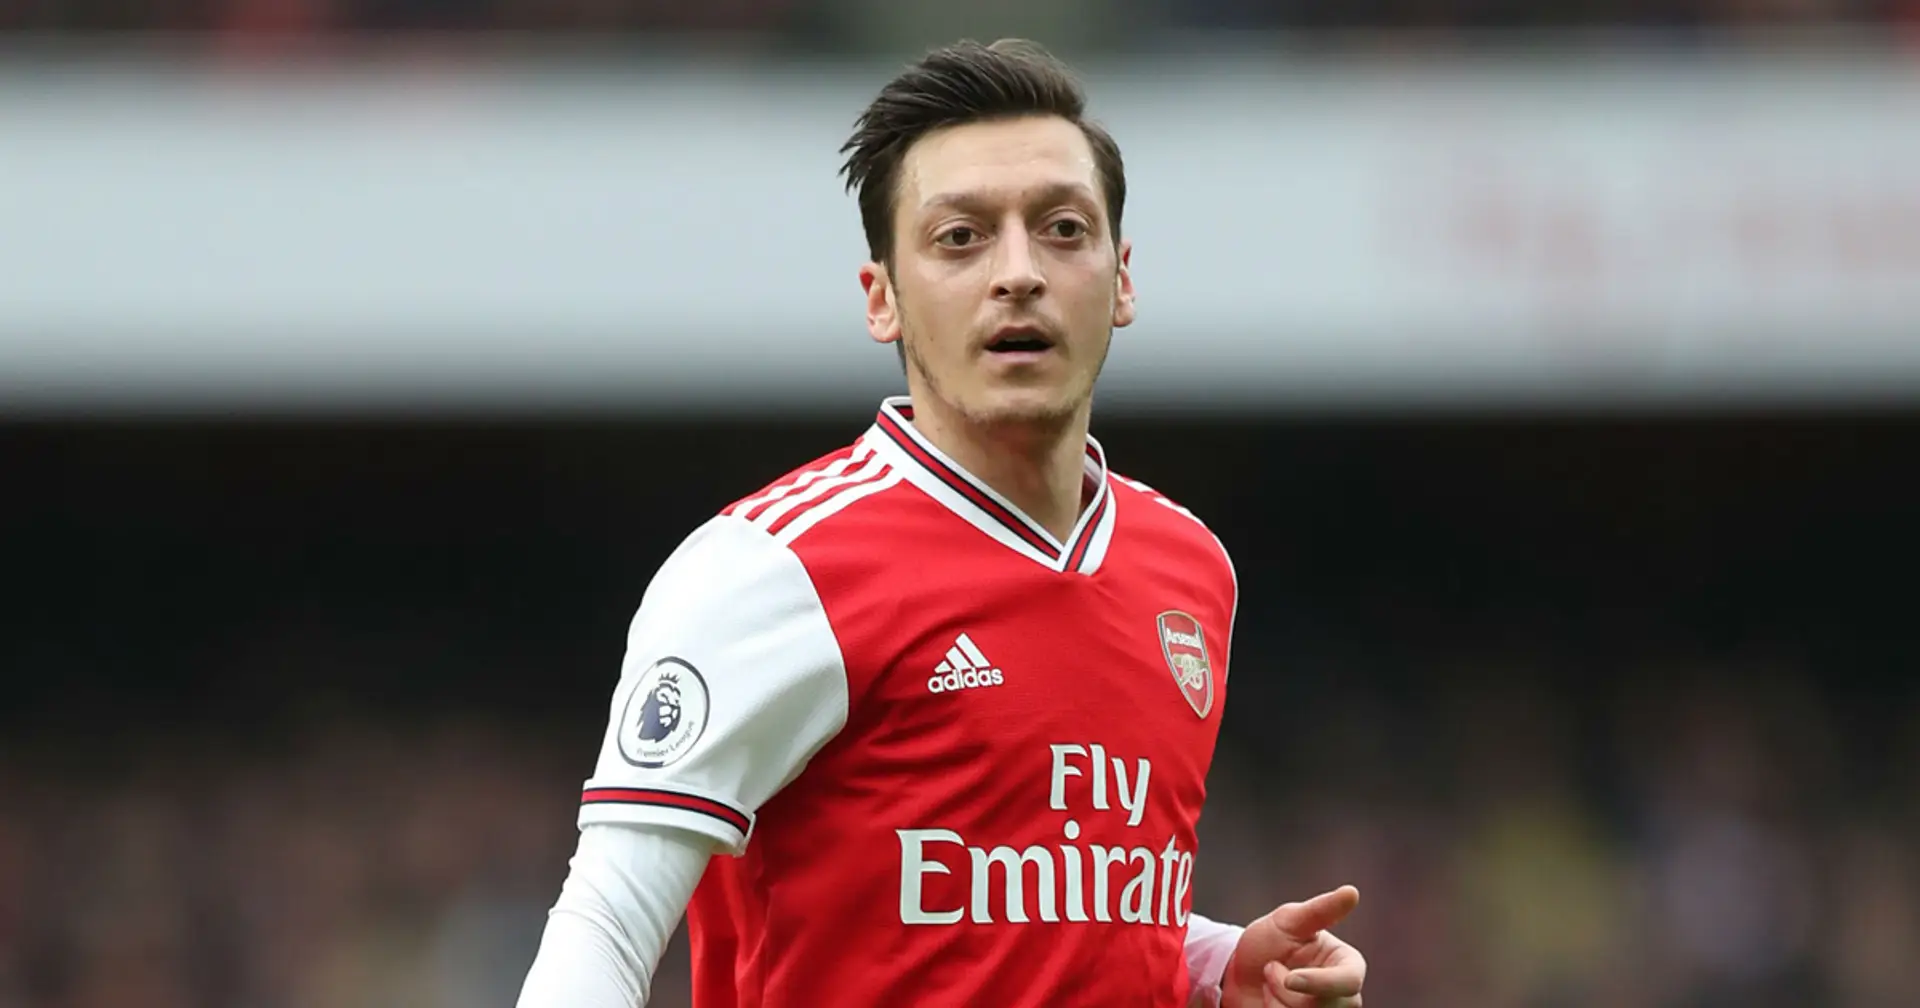 Is Ozil to Fenerbahce really happening? Here's everything we know so far